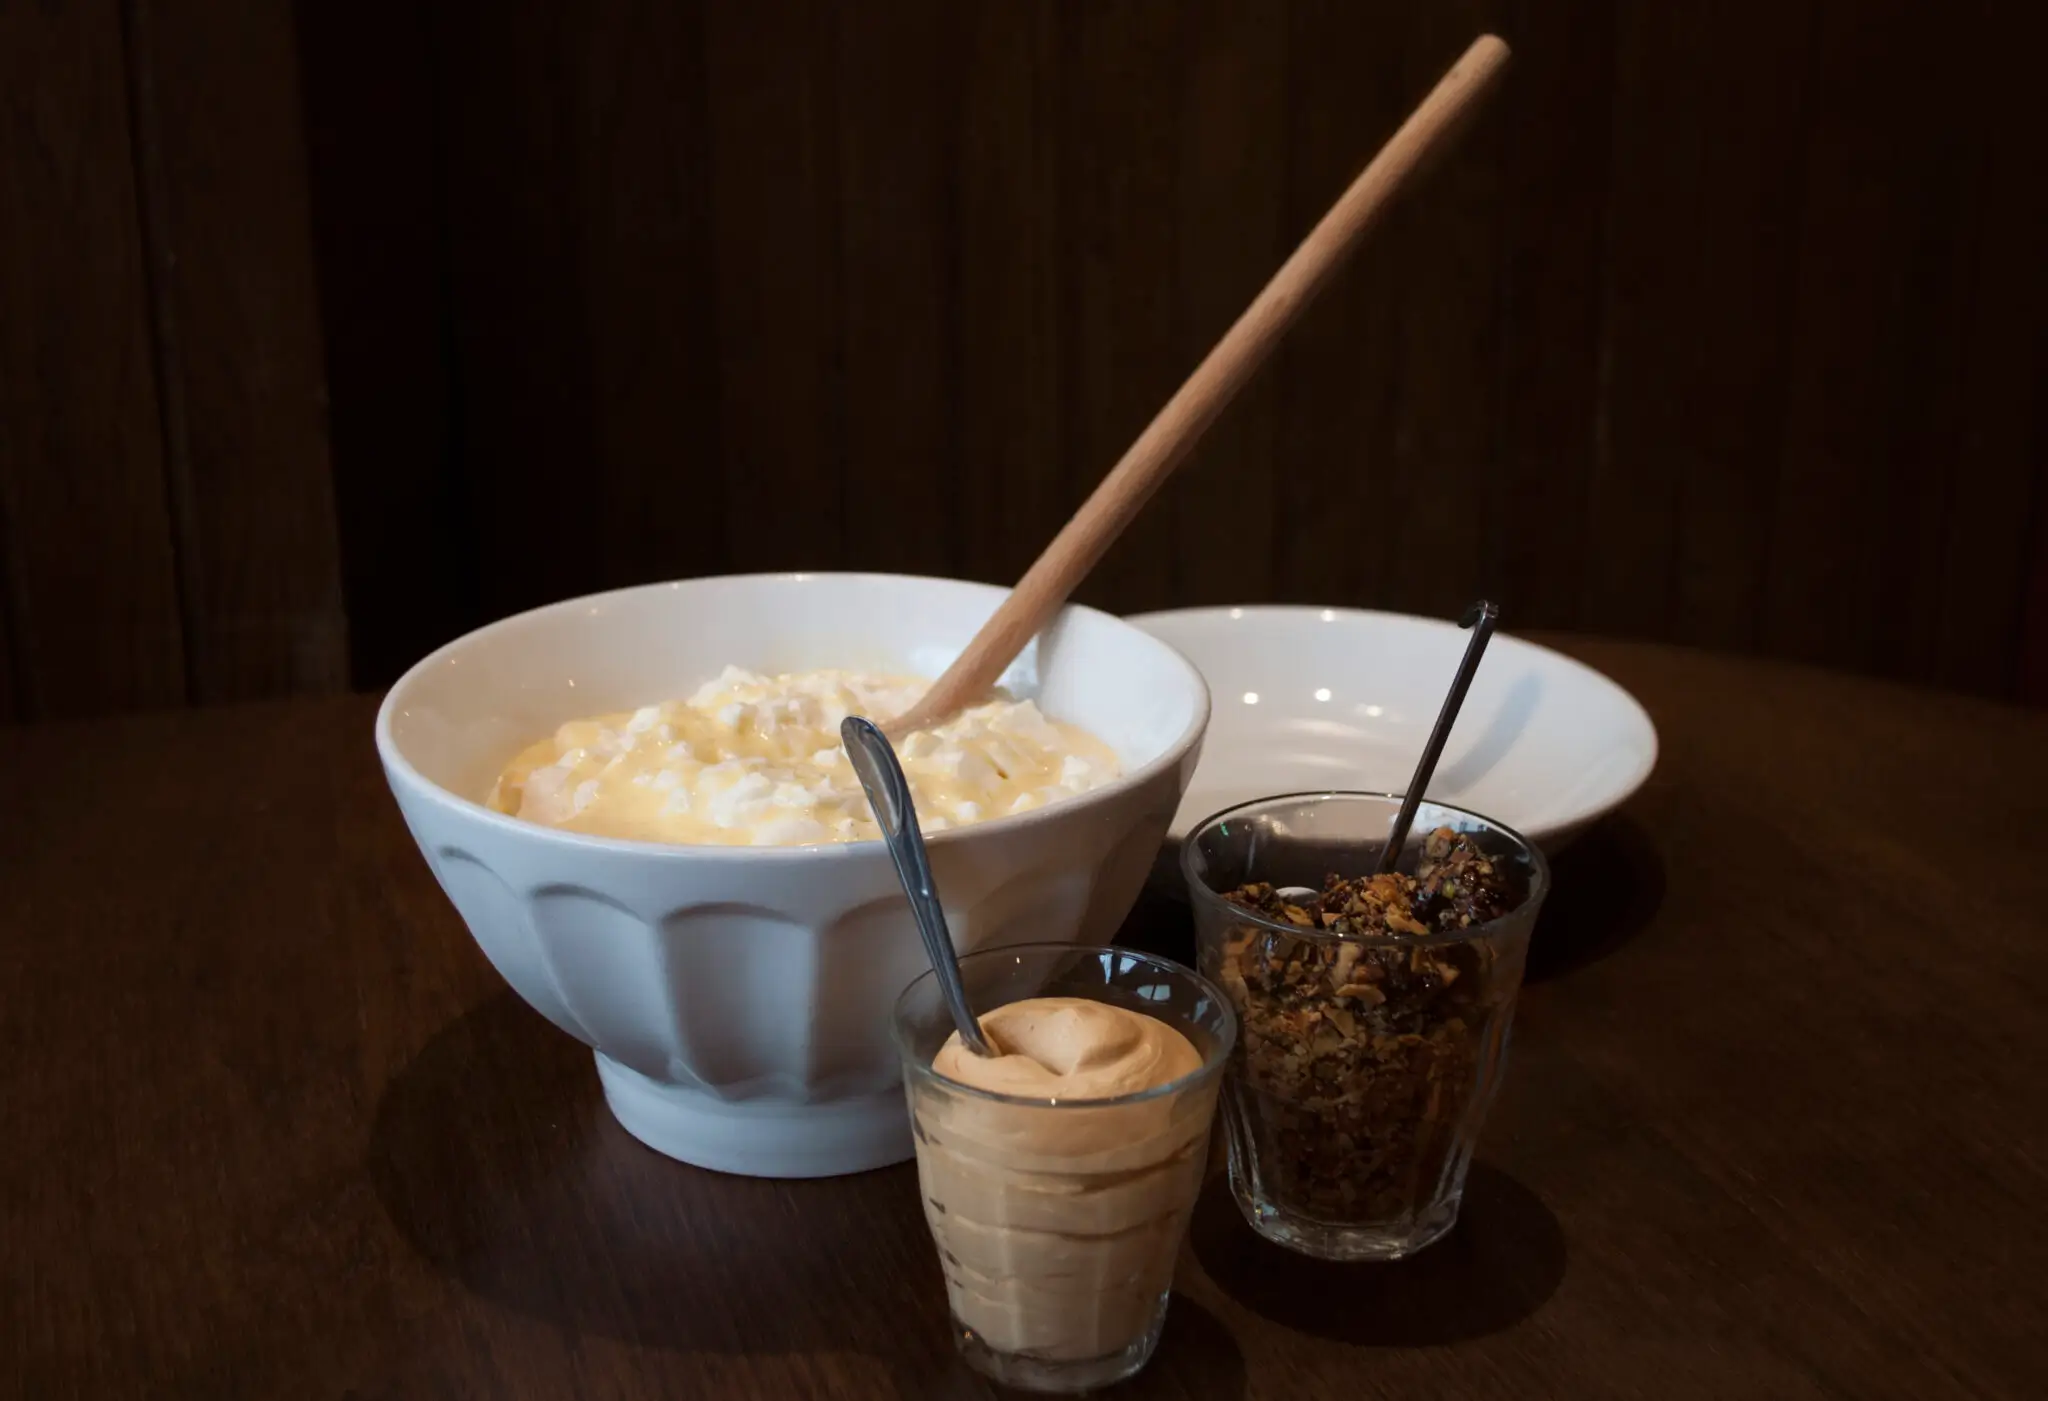 Famous creamy rice pudding from L'Ami Jean in Paris, served in a large white bowl with a wooden spoon, accompanied by a glass of whipped cream and a jar of granola.